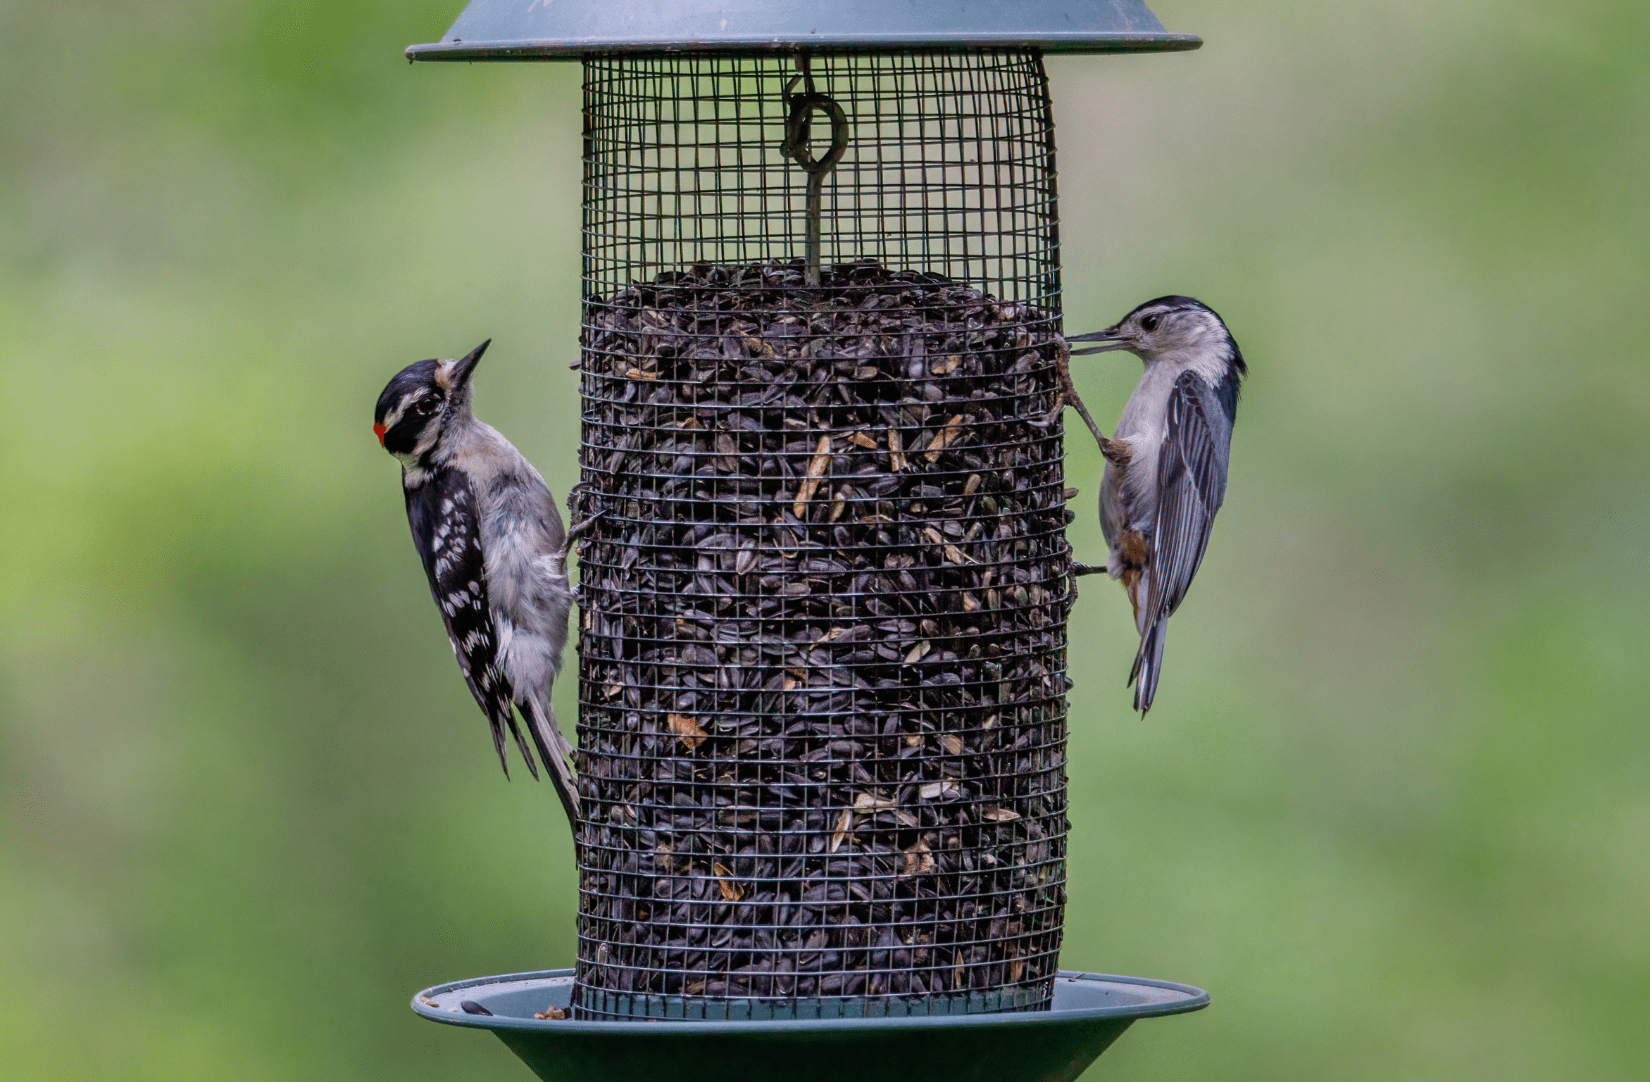 Downy woodpecker and nuthatch cling to sides of seed bird feeder